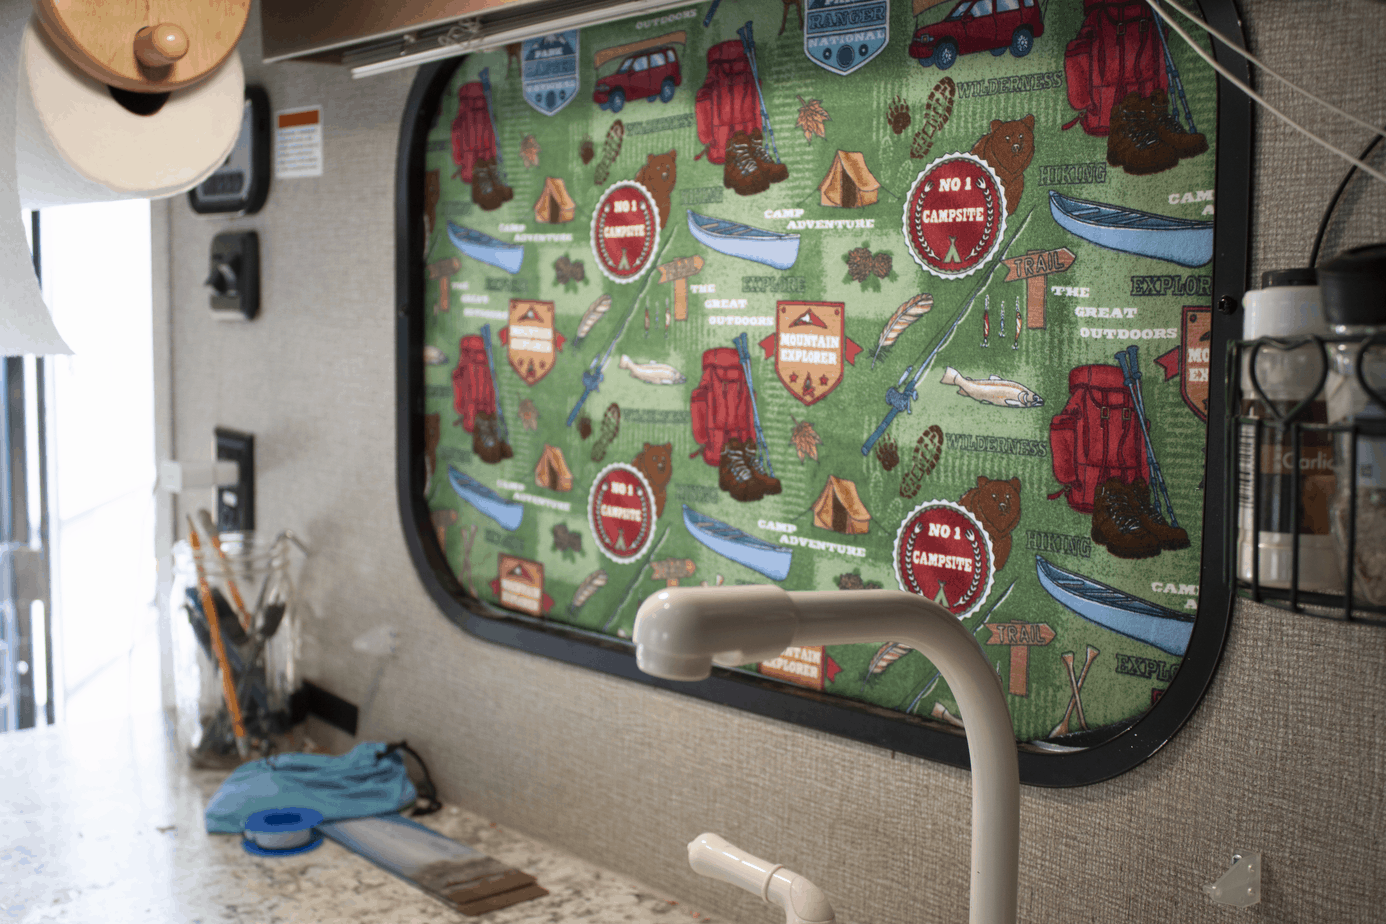 https://www.thecrazyoutdoormama.com/wp-content/uploads/2019/04/diy-custom-rv-camper-blackout-cover-shades.png